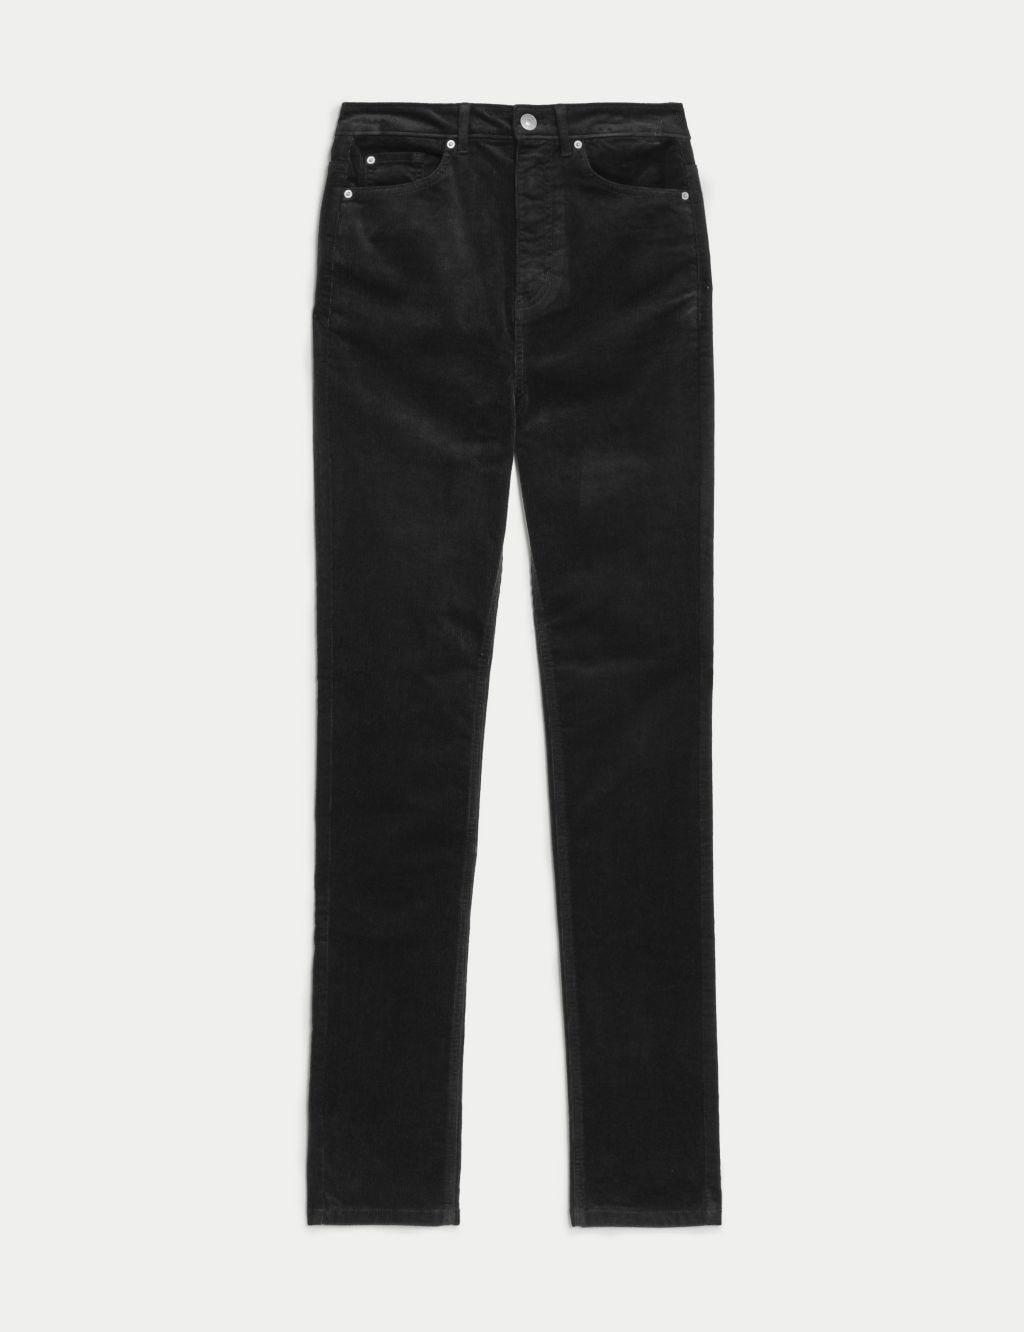 Cord Straight Leg Trousers image 2